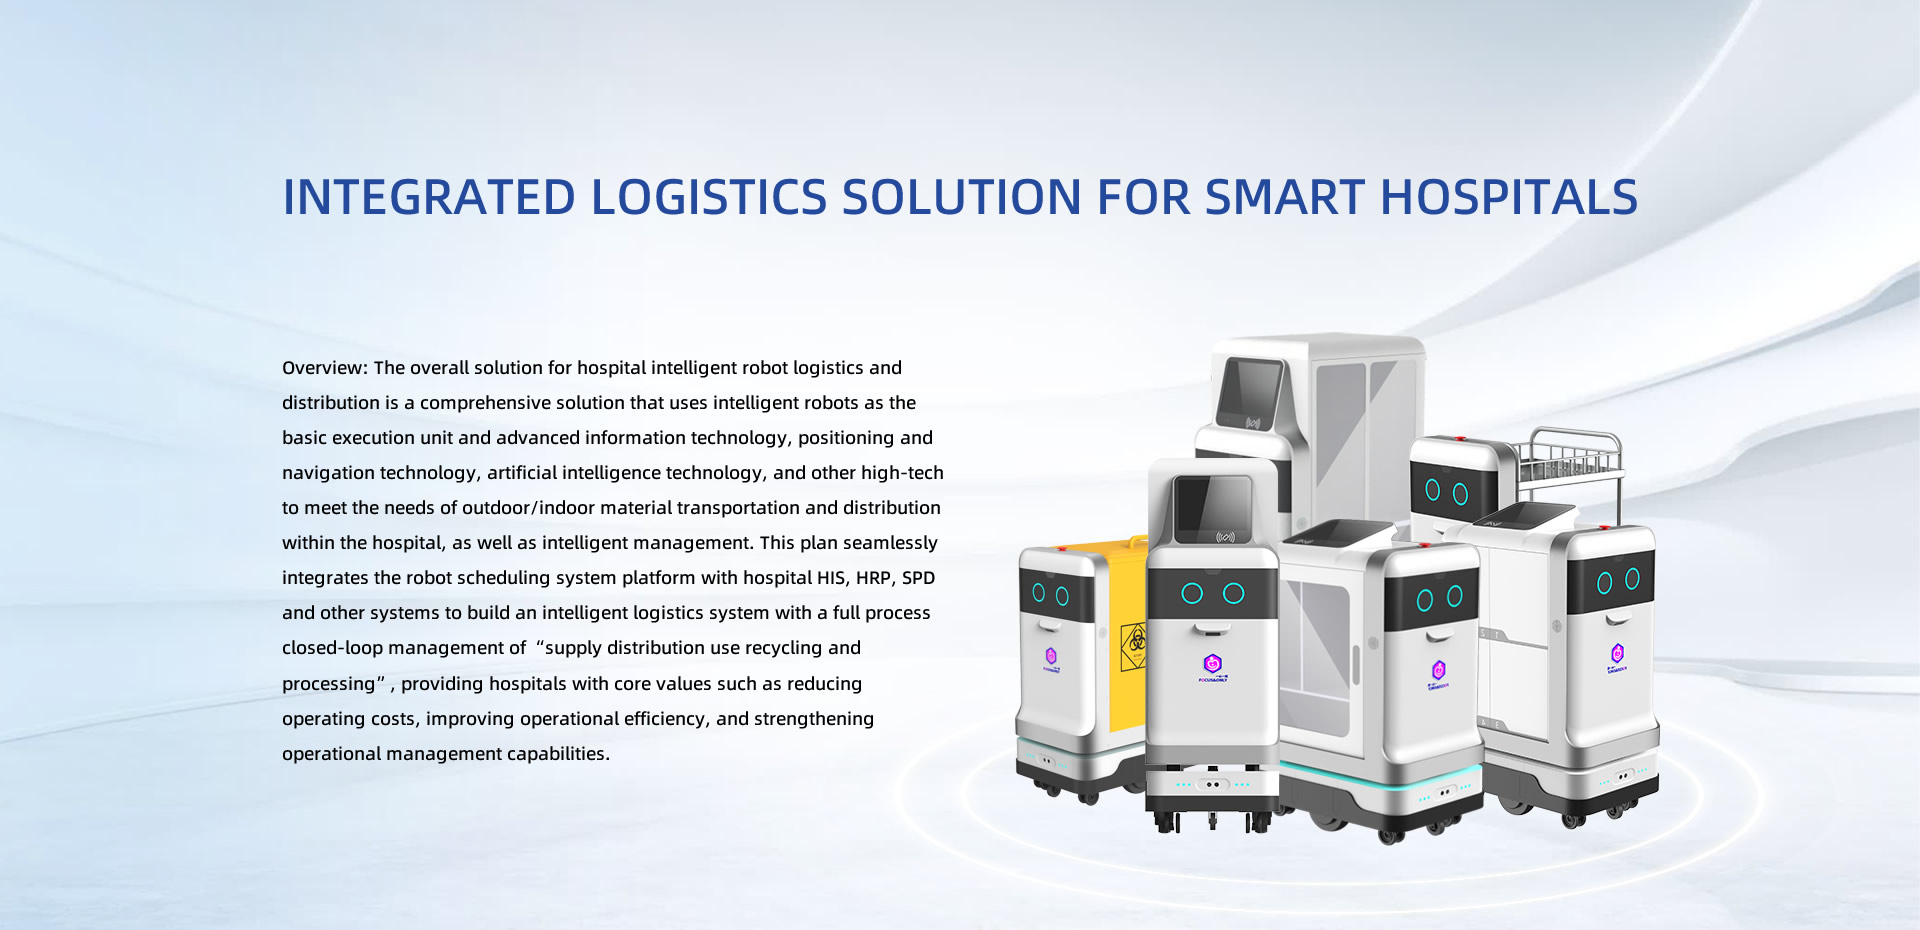 Integrated logistics solution for smart hospitals. Overview: The overall solution for hospital intelligent robot logistics and distribution is a comprehensive solution that uses intelligent robots as the basic execution unit and advanced information technology, positioning and navigation technology, artificial intelligence technology, and other high-tech to meet the needs of outdoor/indoor material transportation and distribution within the hospital, as well as intelligent management. This plan seamlessly integrates the robot scheduling system platform with hospital HIS, HRP, SPD and other systems to build an intelligent logistics system with a full process closed-loop management of 'supply distribution use recycling and processing', providing hospitals with core values such as reducing operating costs, improving operational efficiency, and strengthening operational management capabilities.